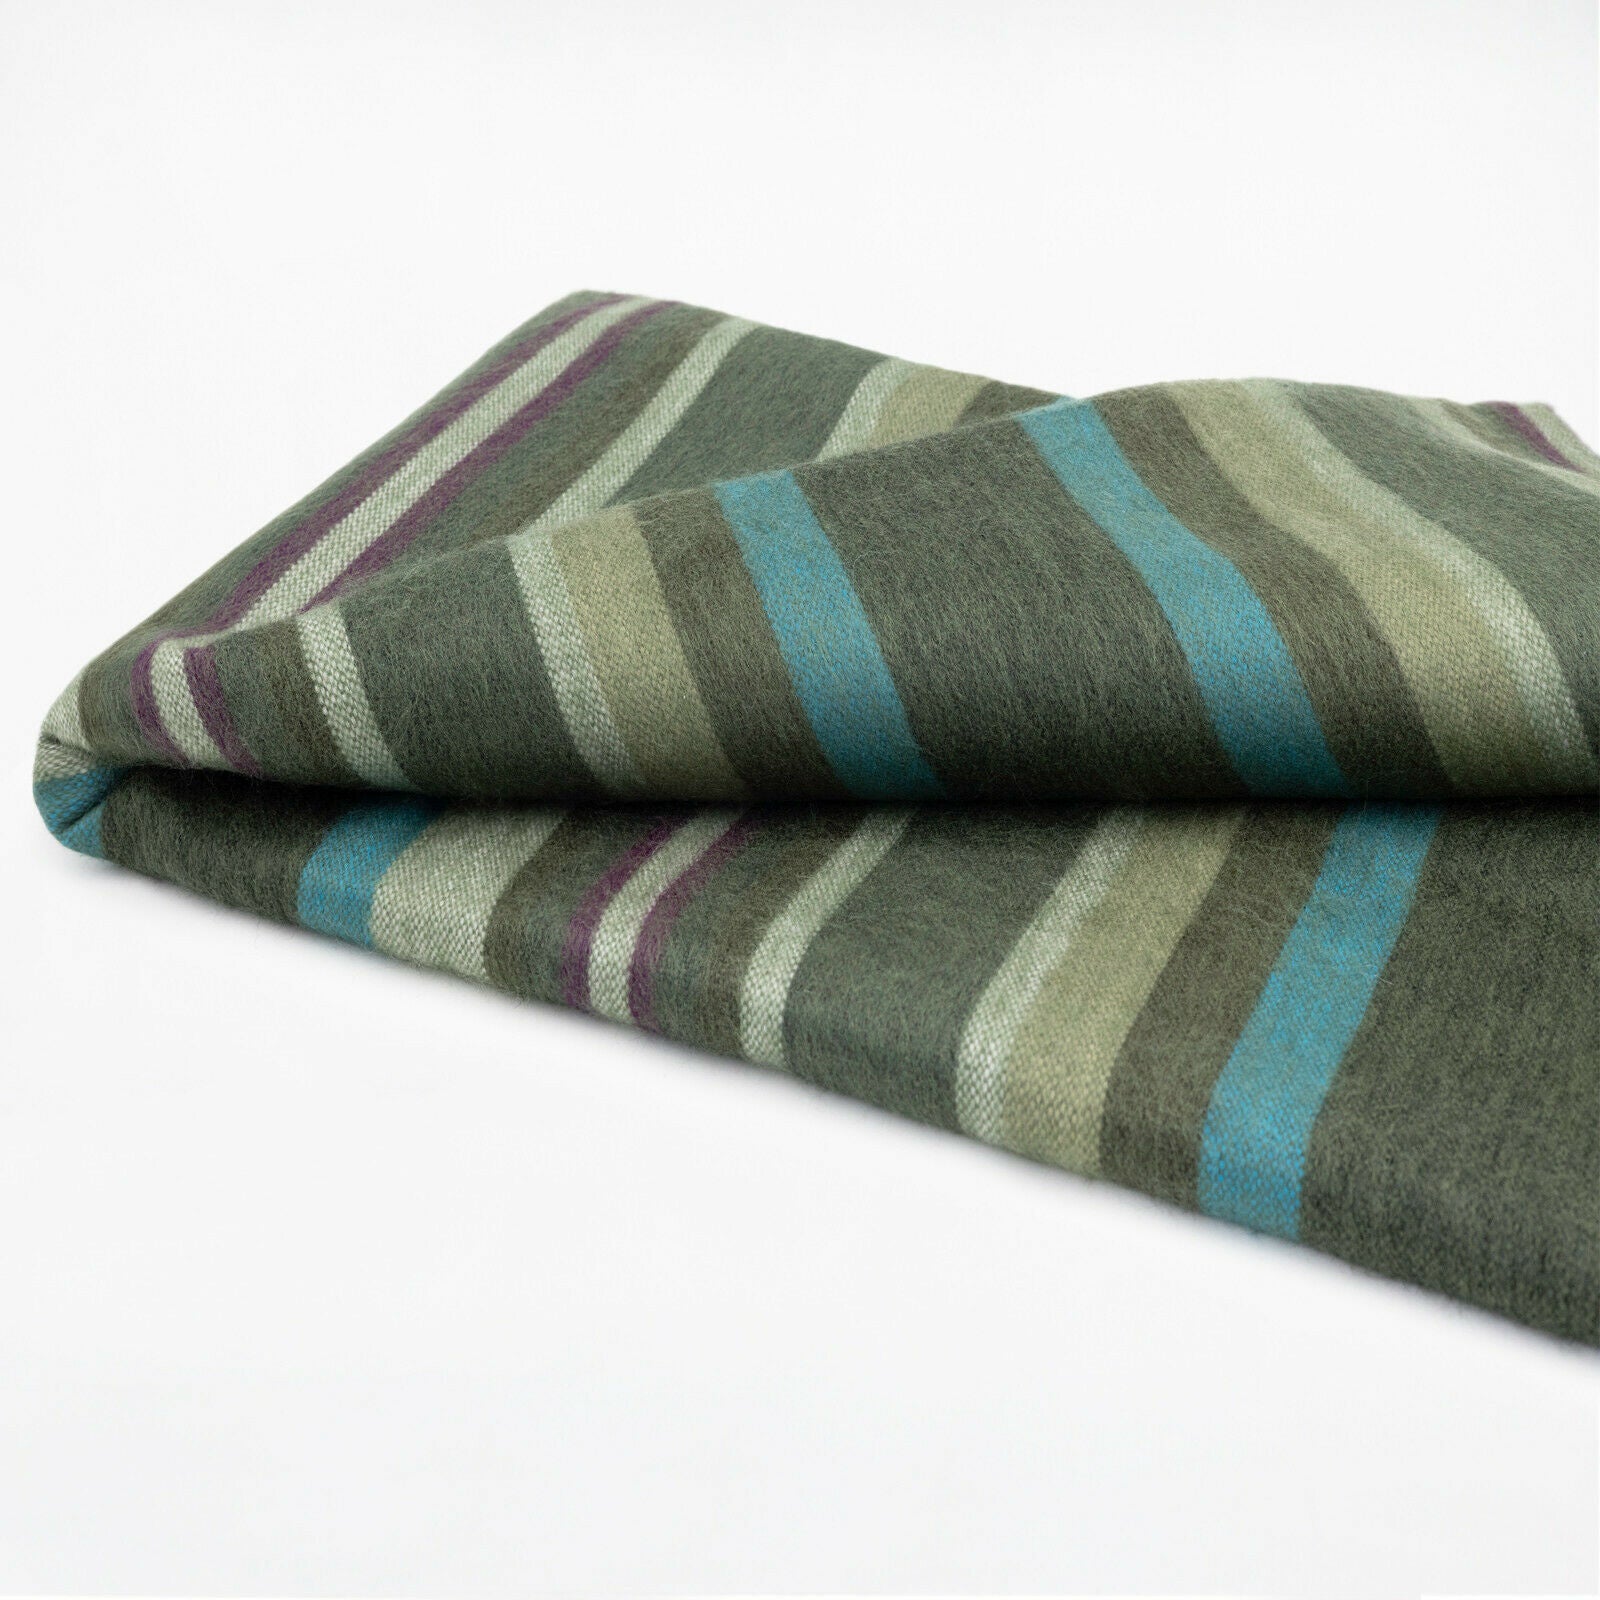 Jambue - Baby Alpaca Wool Throw Blanket / Sofa Cover - Queen 95" x 66" - olive green stripes pattern